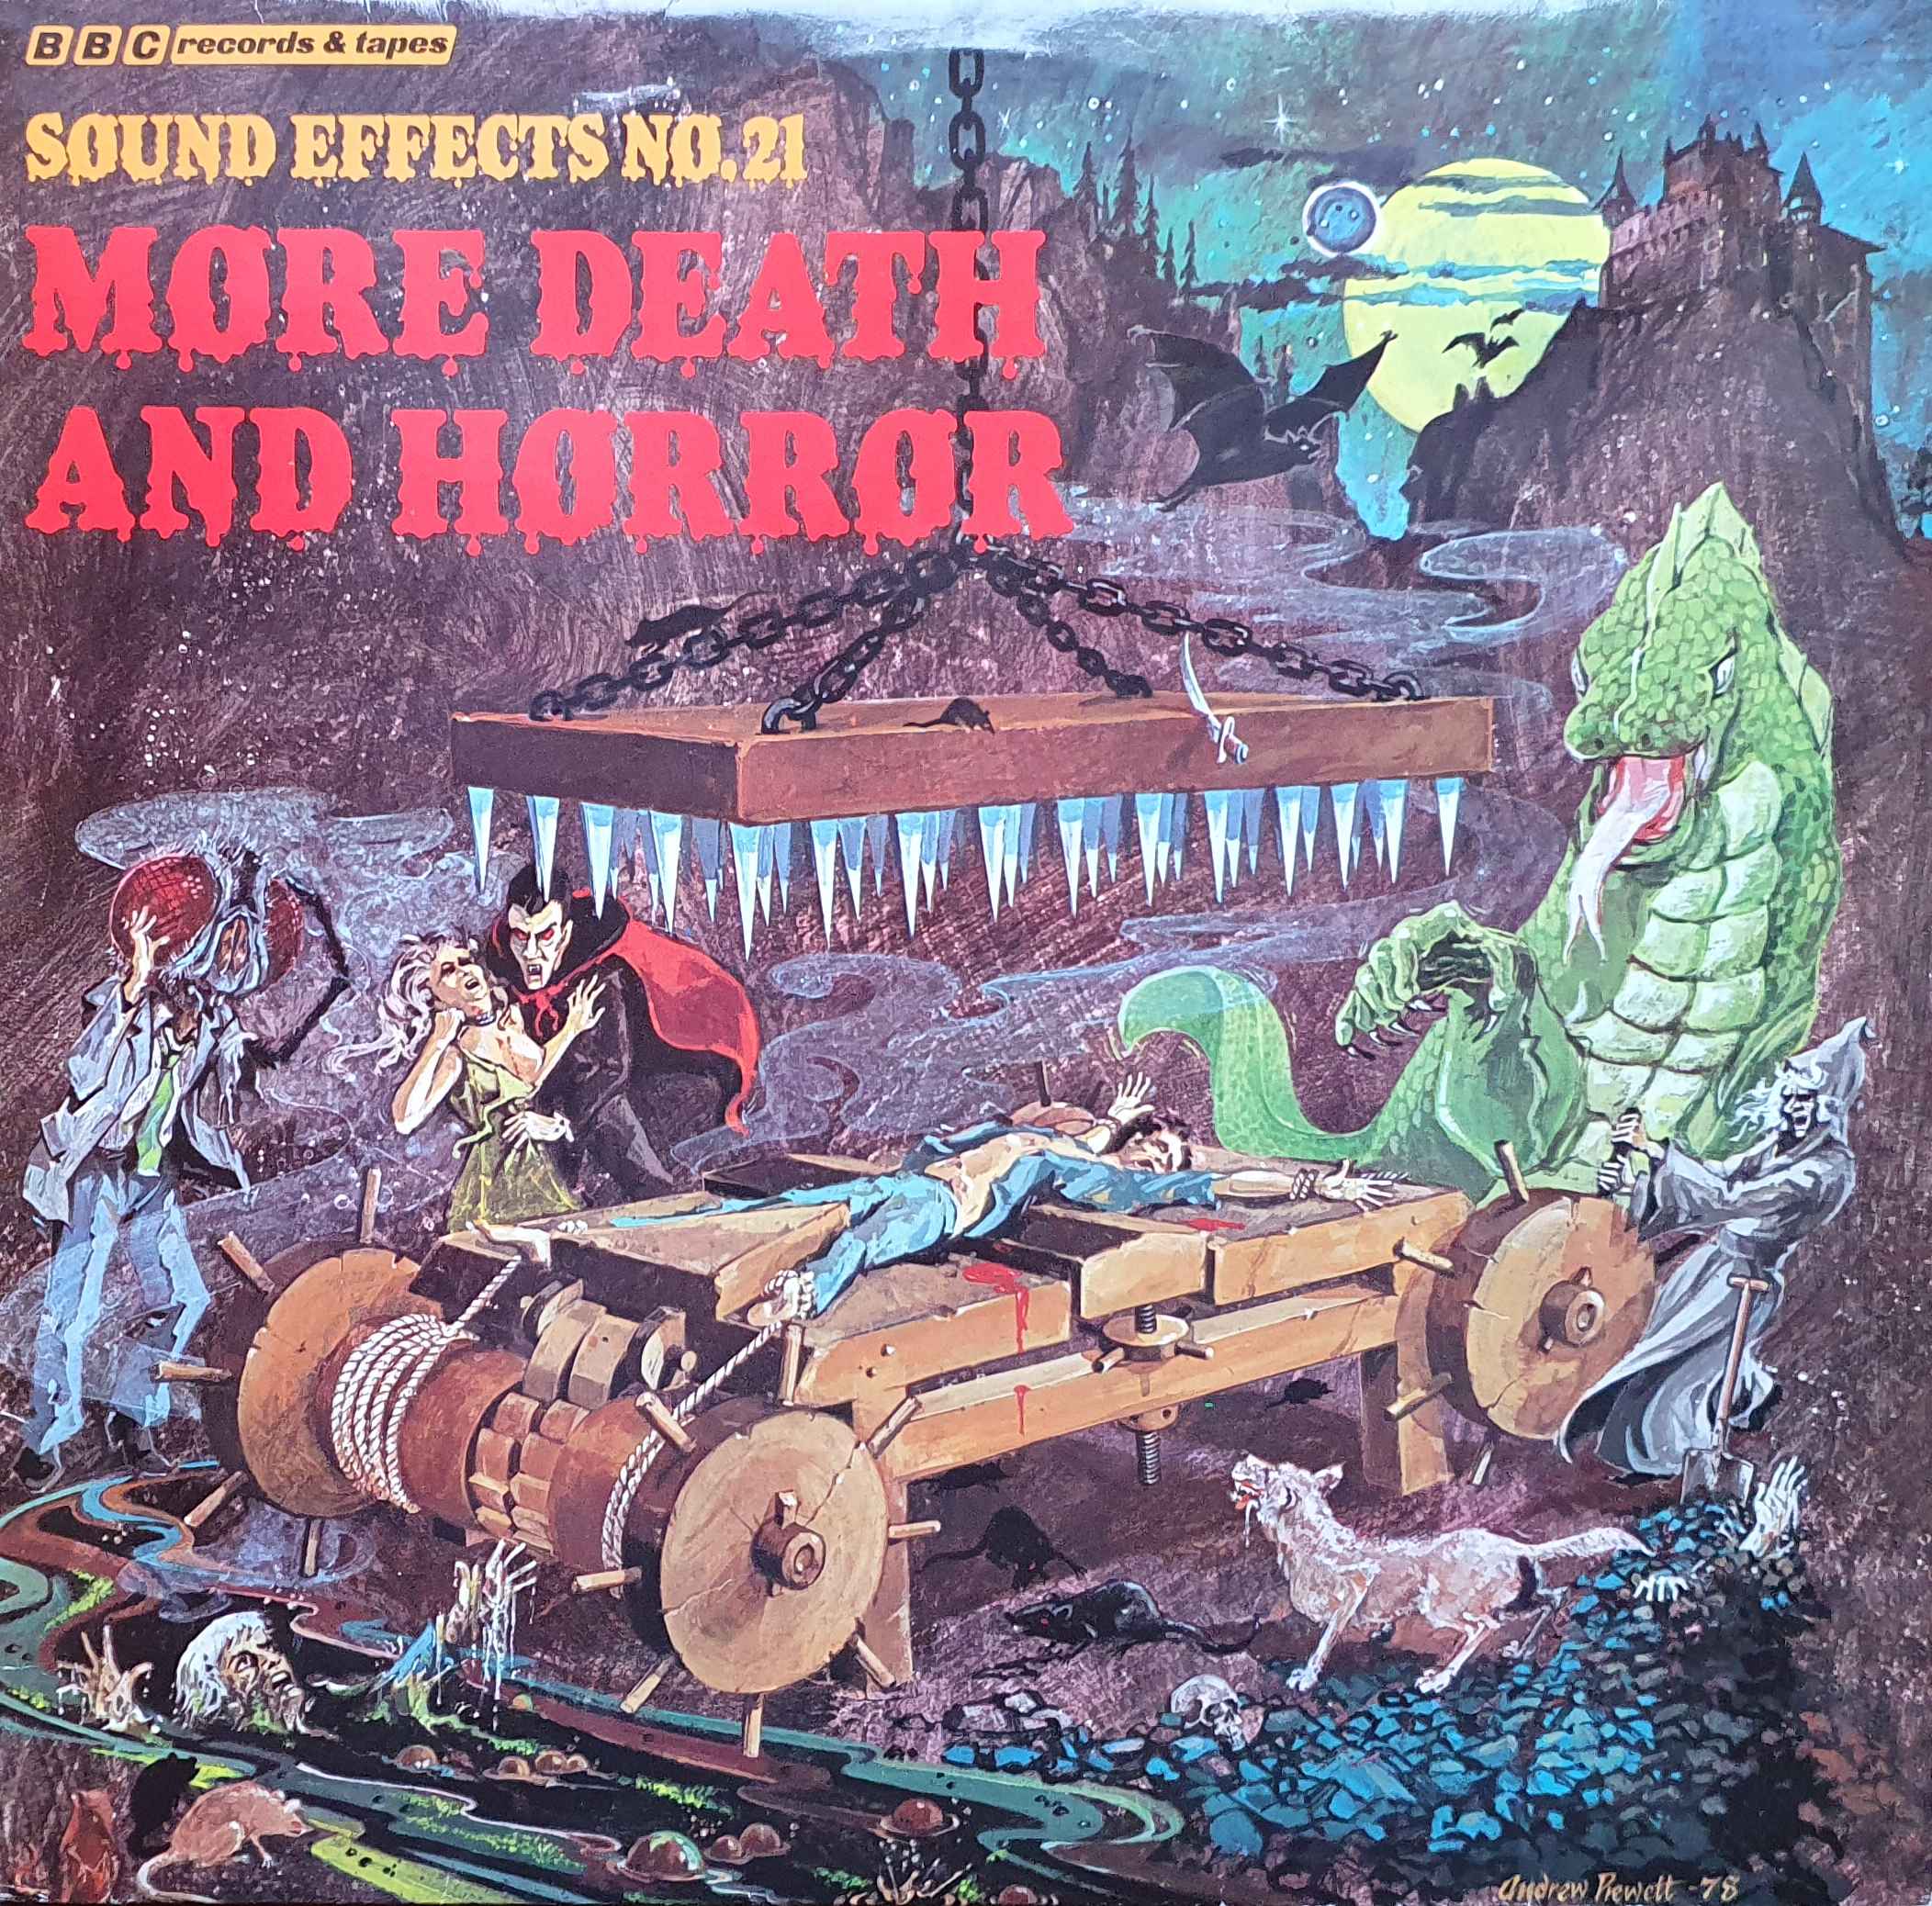 Picture of More death and horror sound effects by artist Mike Harding / Peter Harwood from the BBC albums - Records and Tapes library